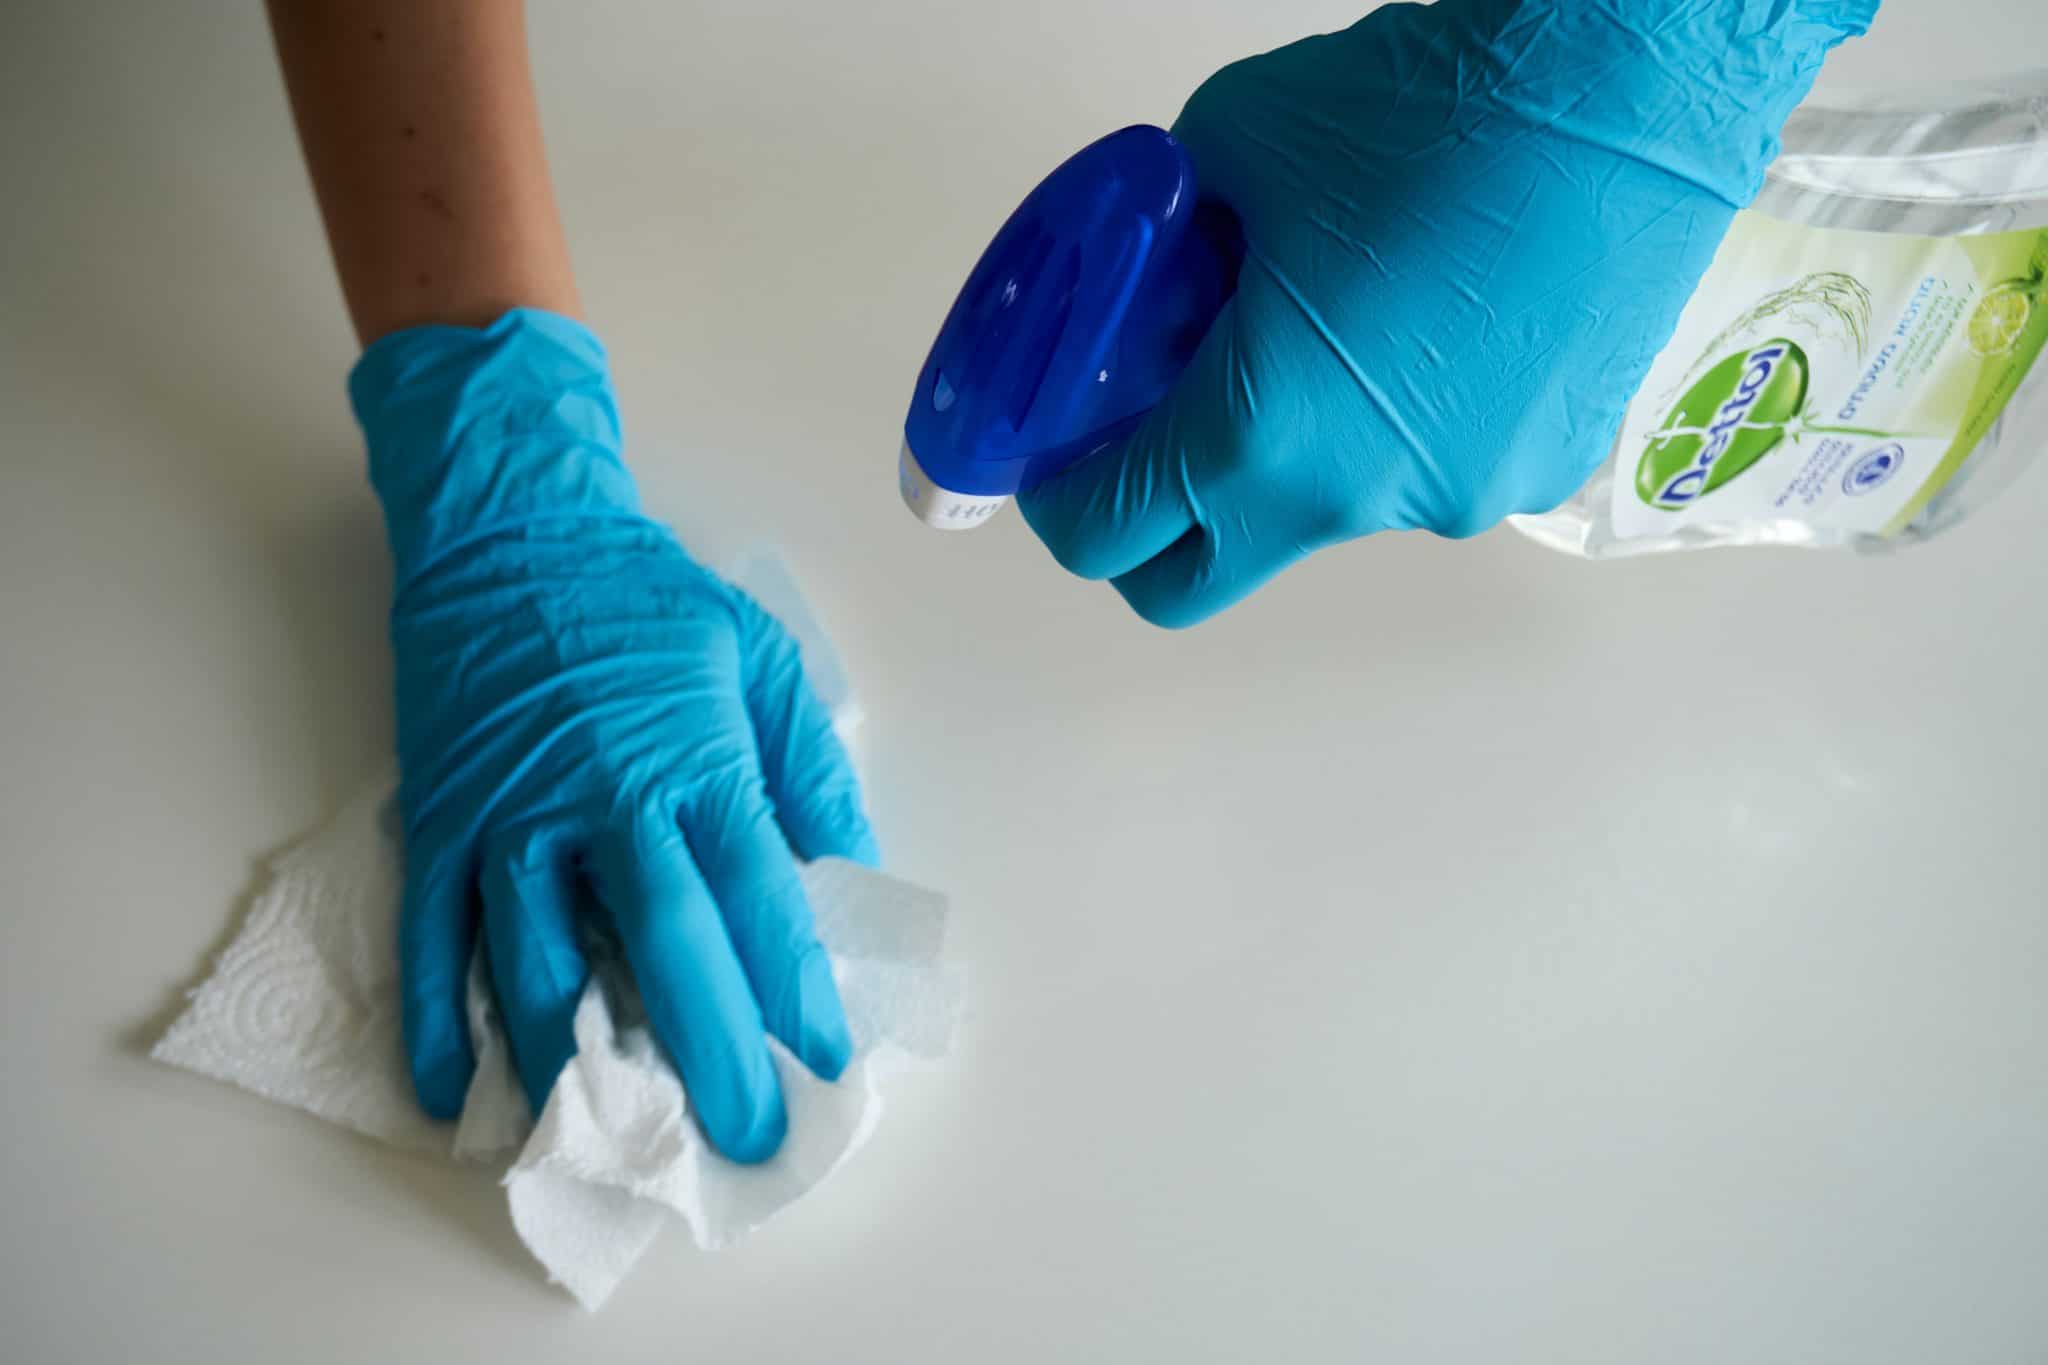 White surface with hands wearing blue plastic rubber gloves cleaning with a Dettol spray bottle and wipe